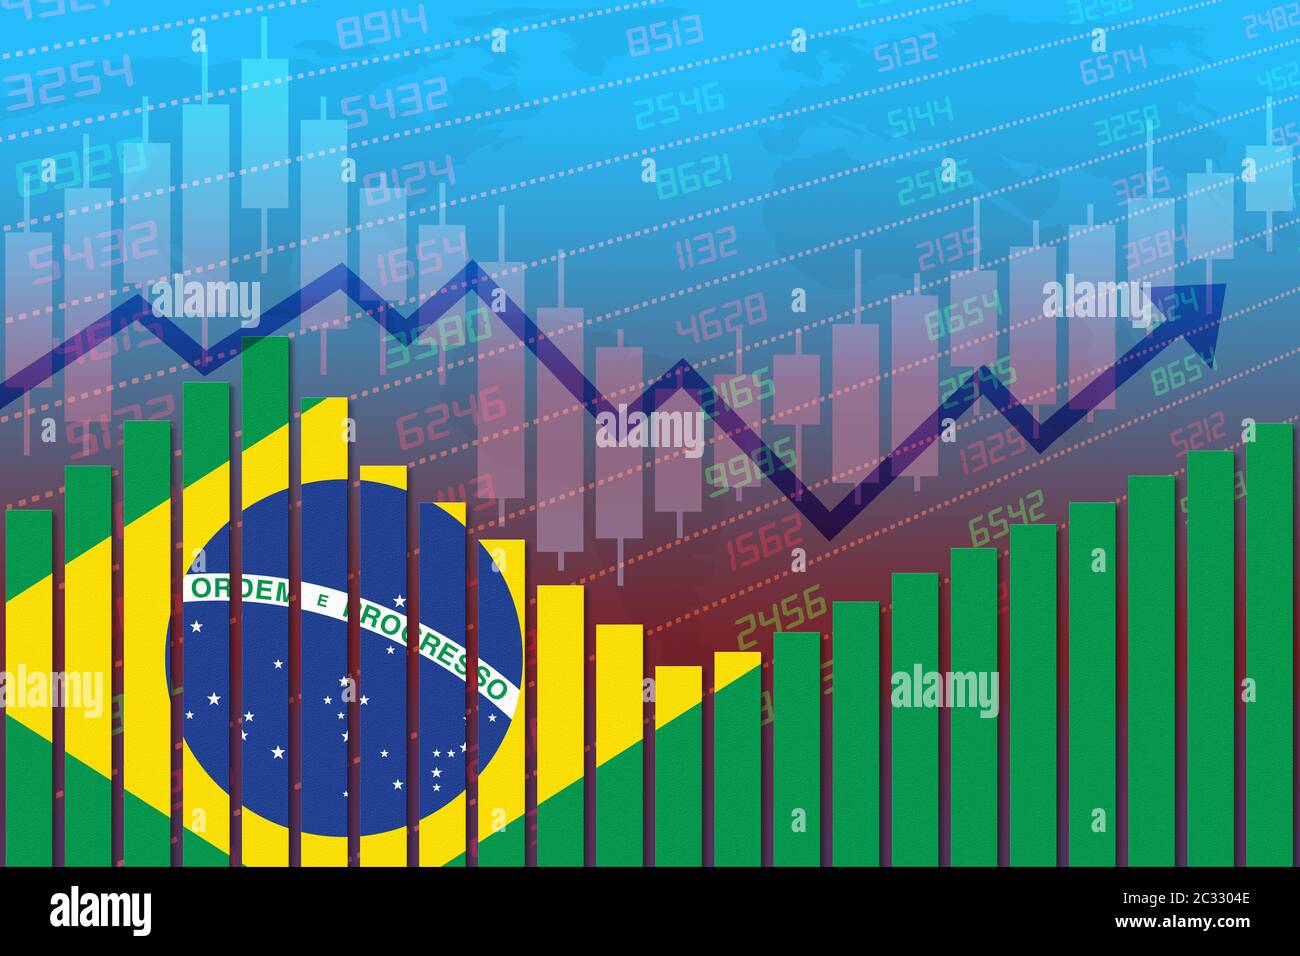 Flag of Brazil on bar chart concept of economic recovery and business improving after crisis such as Covid-19 or other catastrophe as economy and busi Stock Photo